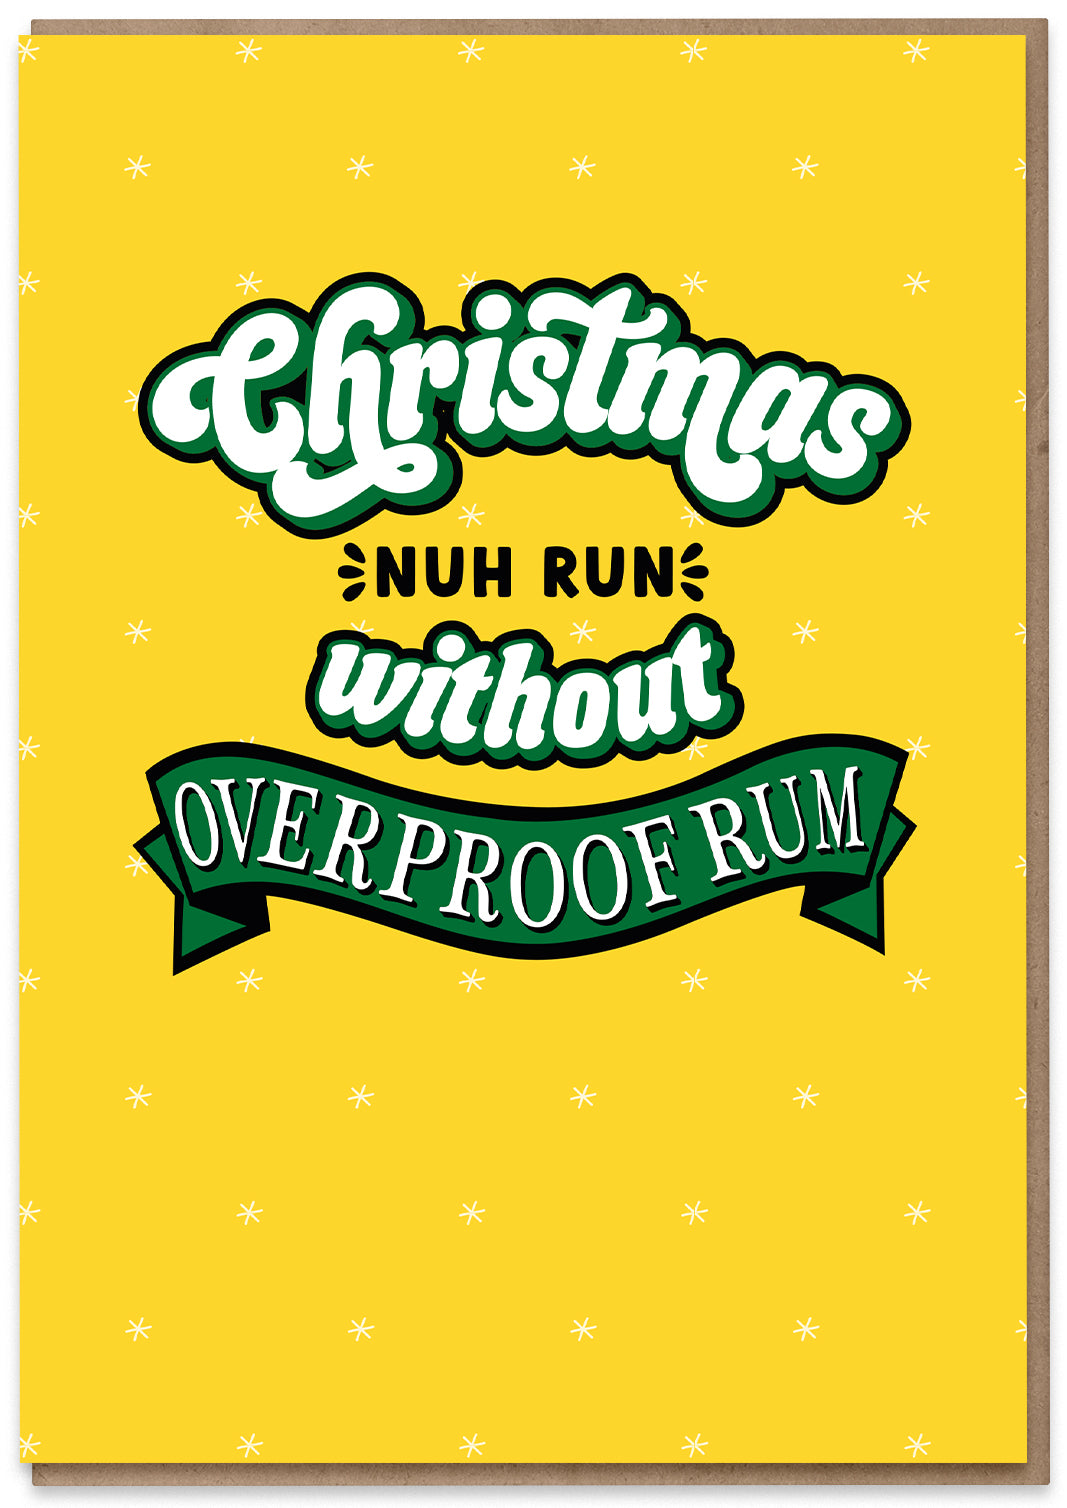 Christmas nuh run without Overproof Rum